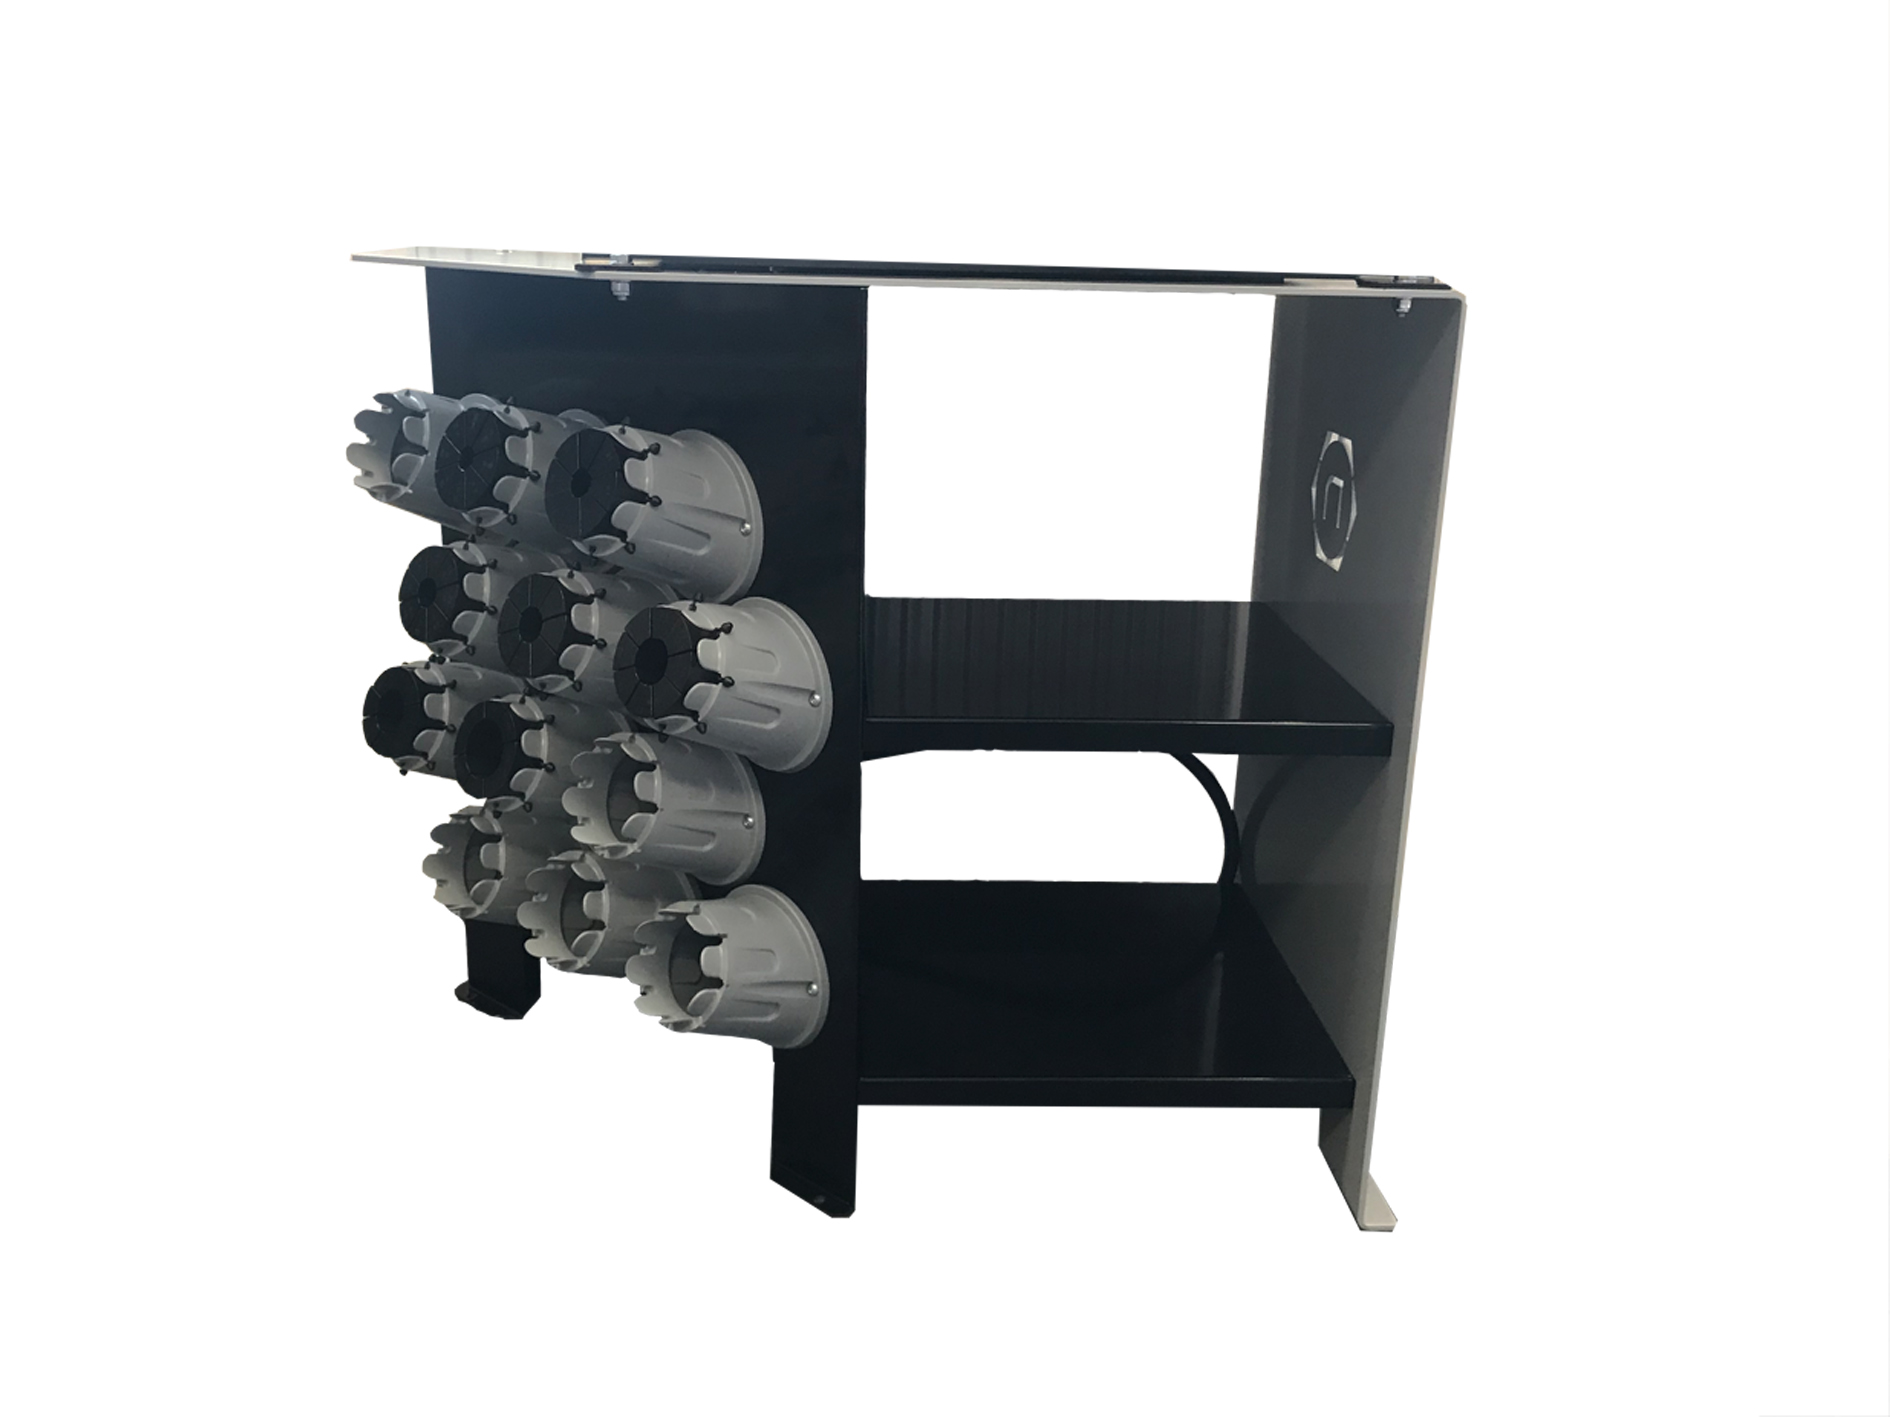 Support Bench with 12 Die Storage & 2 Shelves